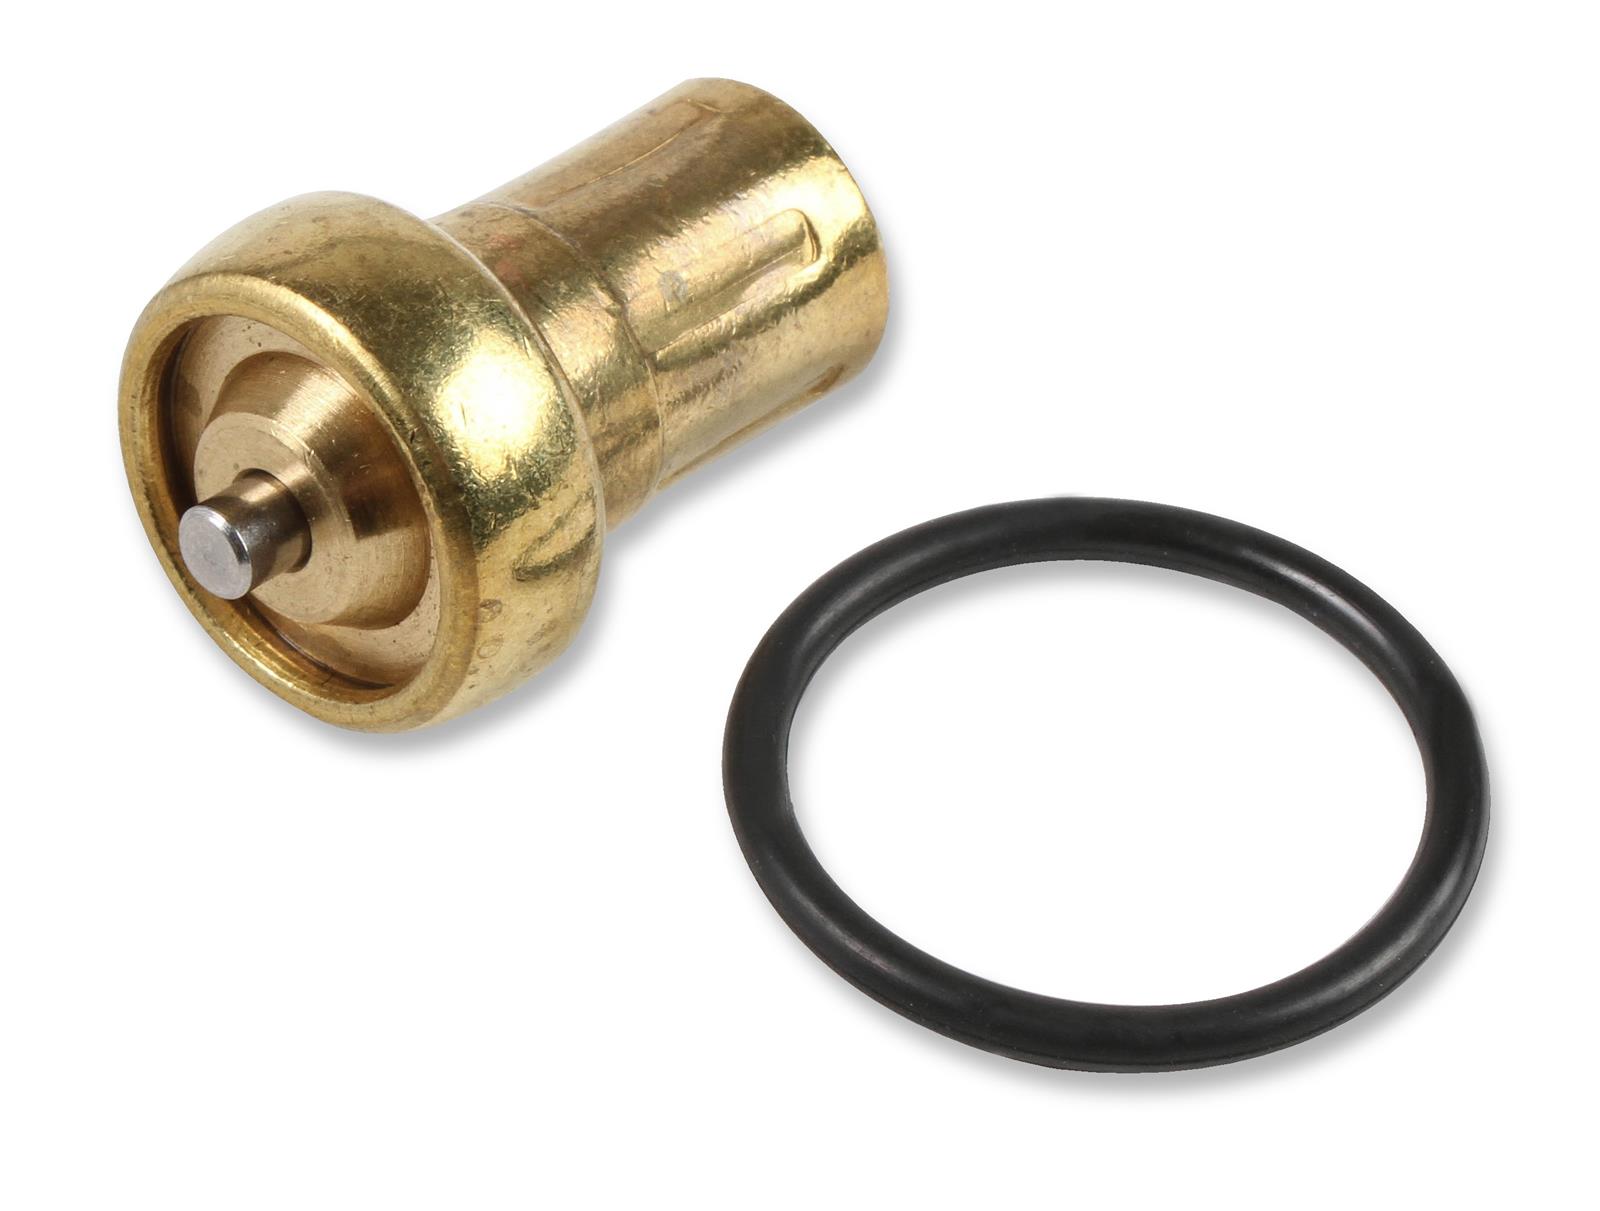 www.americanspareparts.de - BY-PASS ADAPTERS